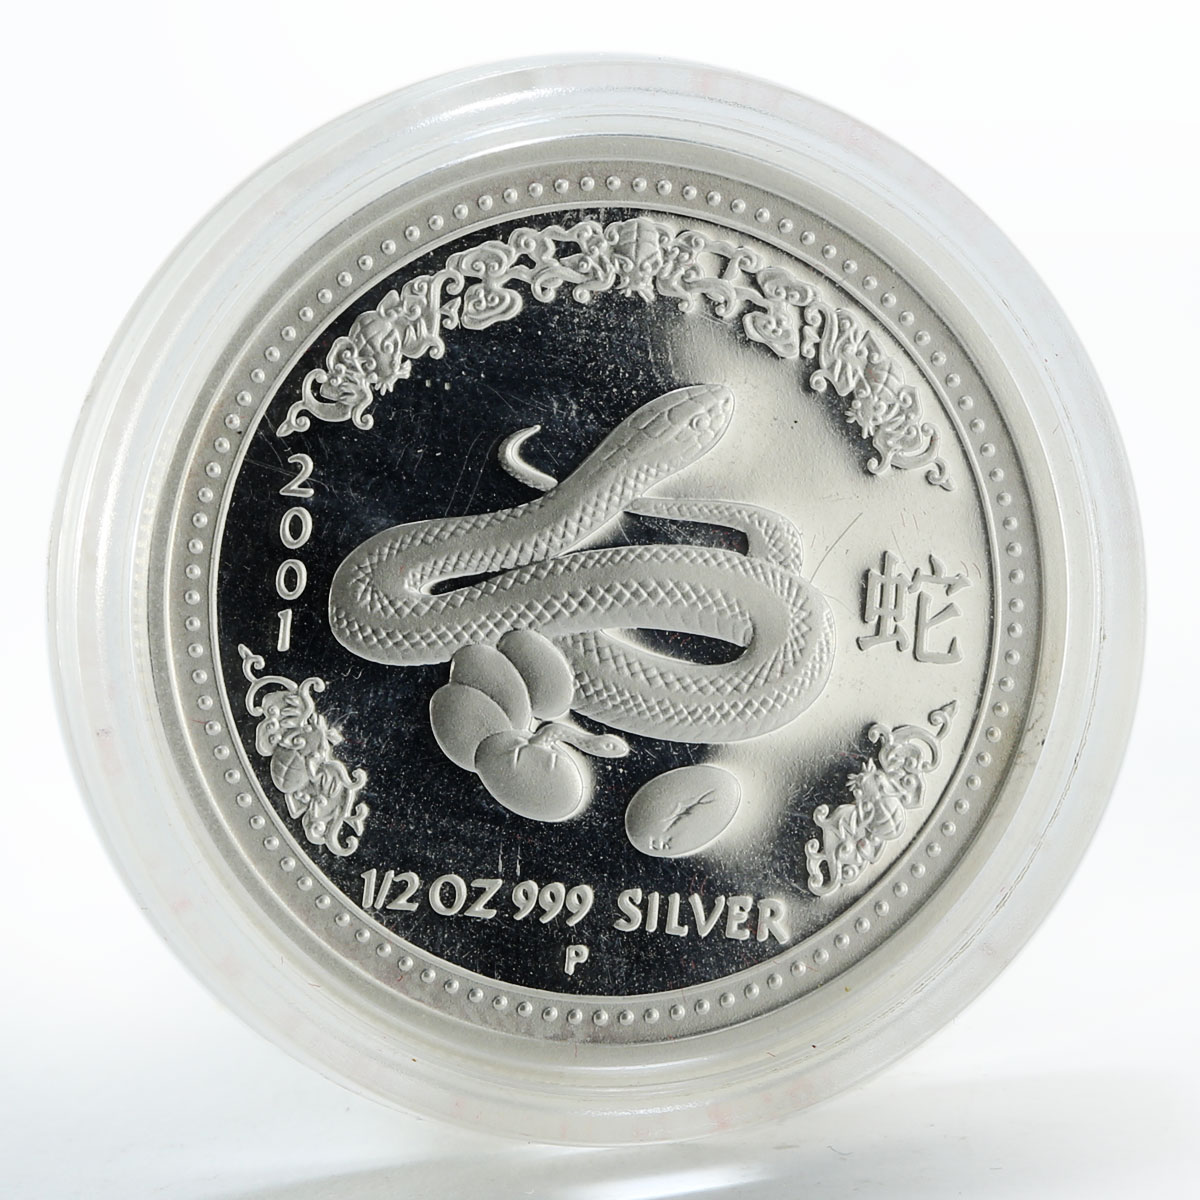 Australia 50 cent Lunar Year of the SNAKE Series I proof silver coin 1/2 oz 2001